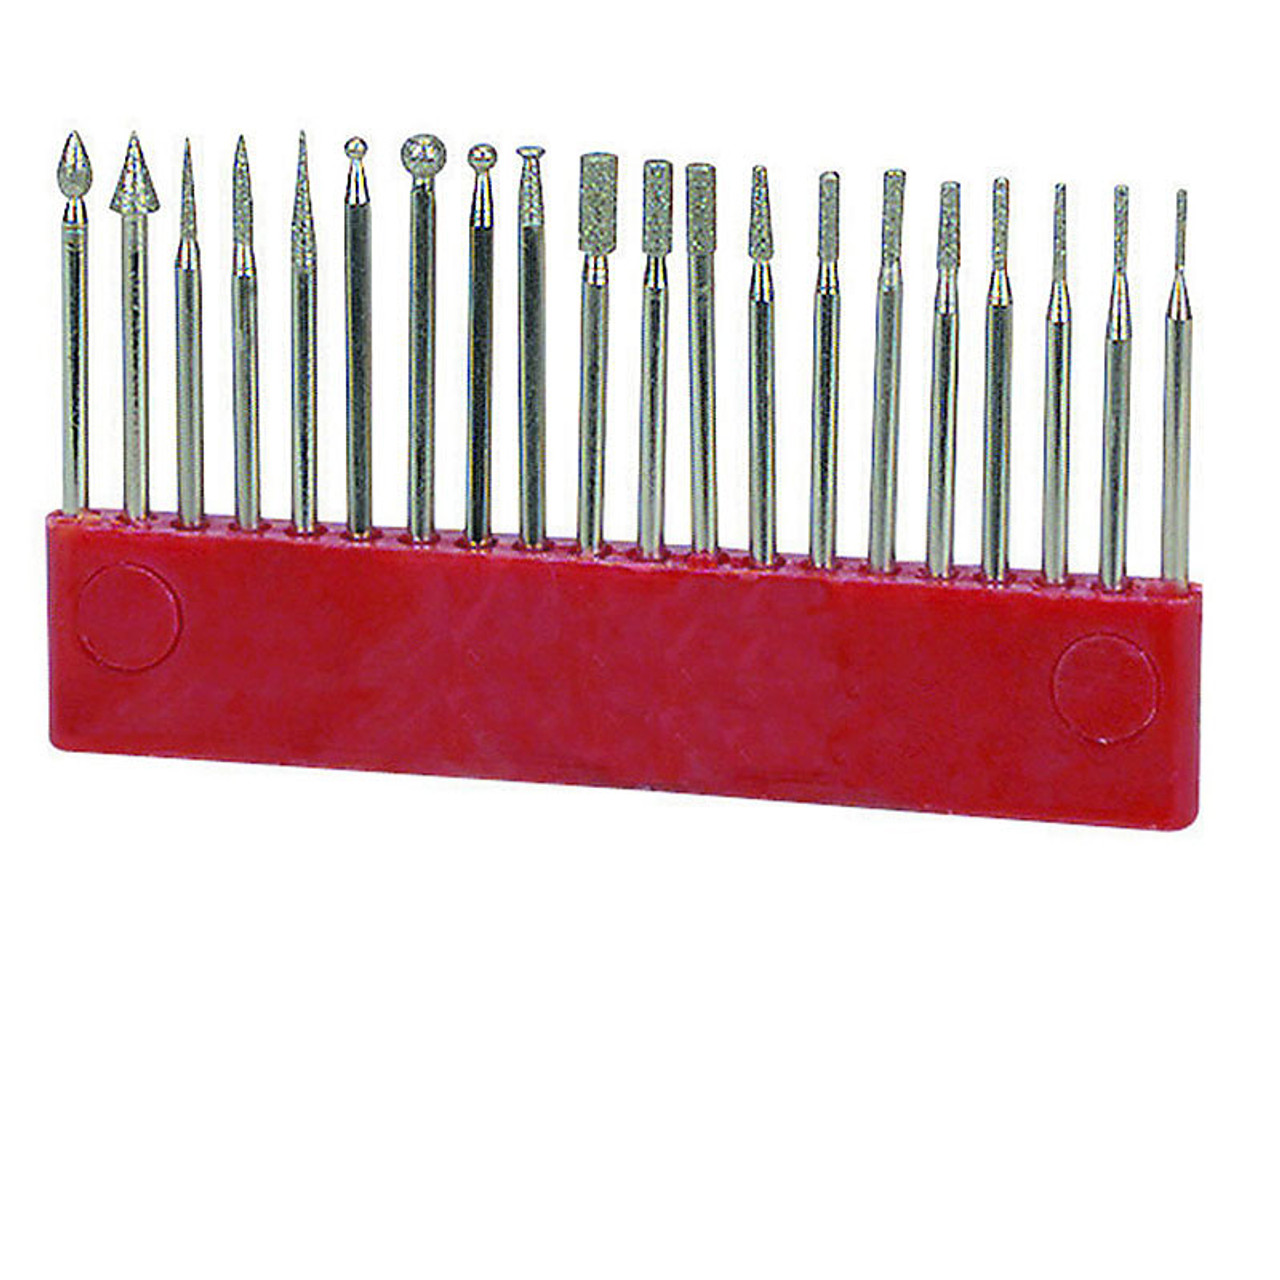 Left Handed Glass Cutter KIT 2 with Diamond Tip Drill Bits and